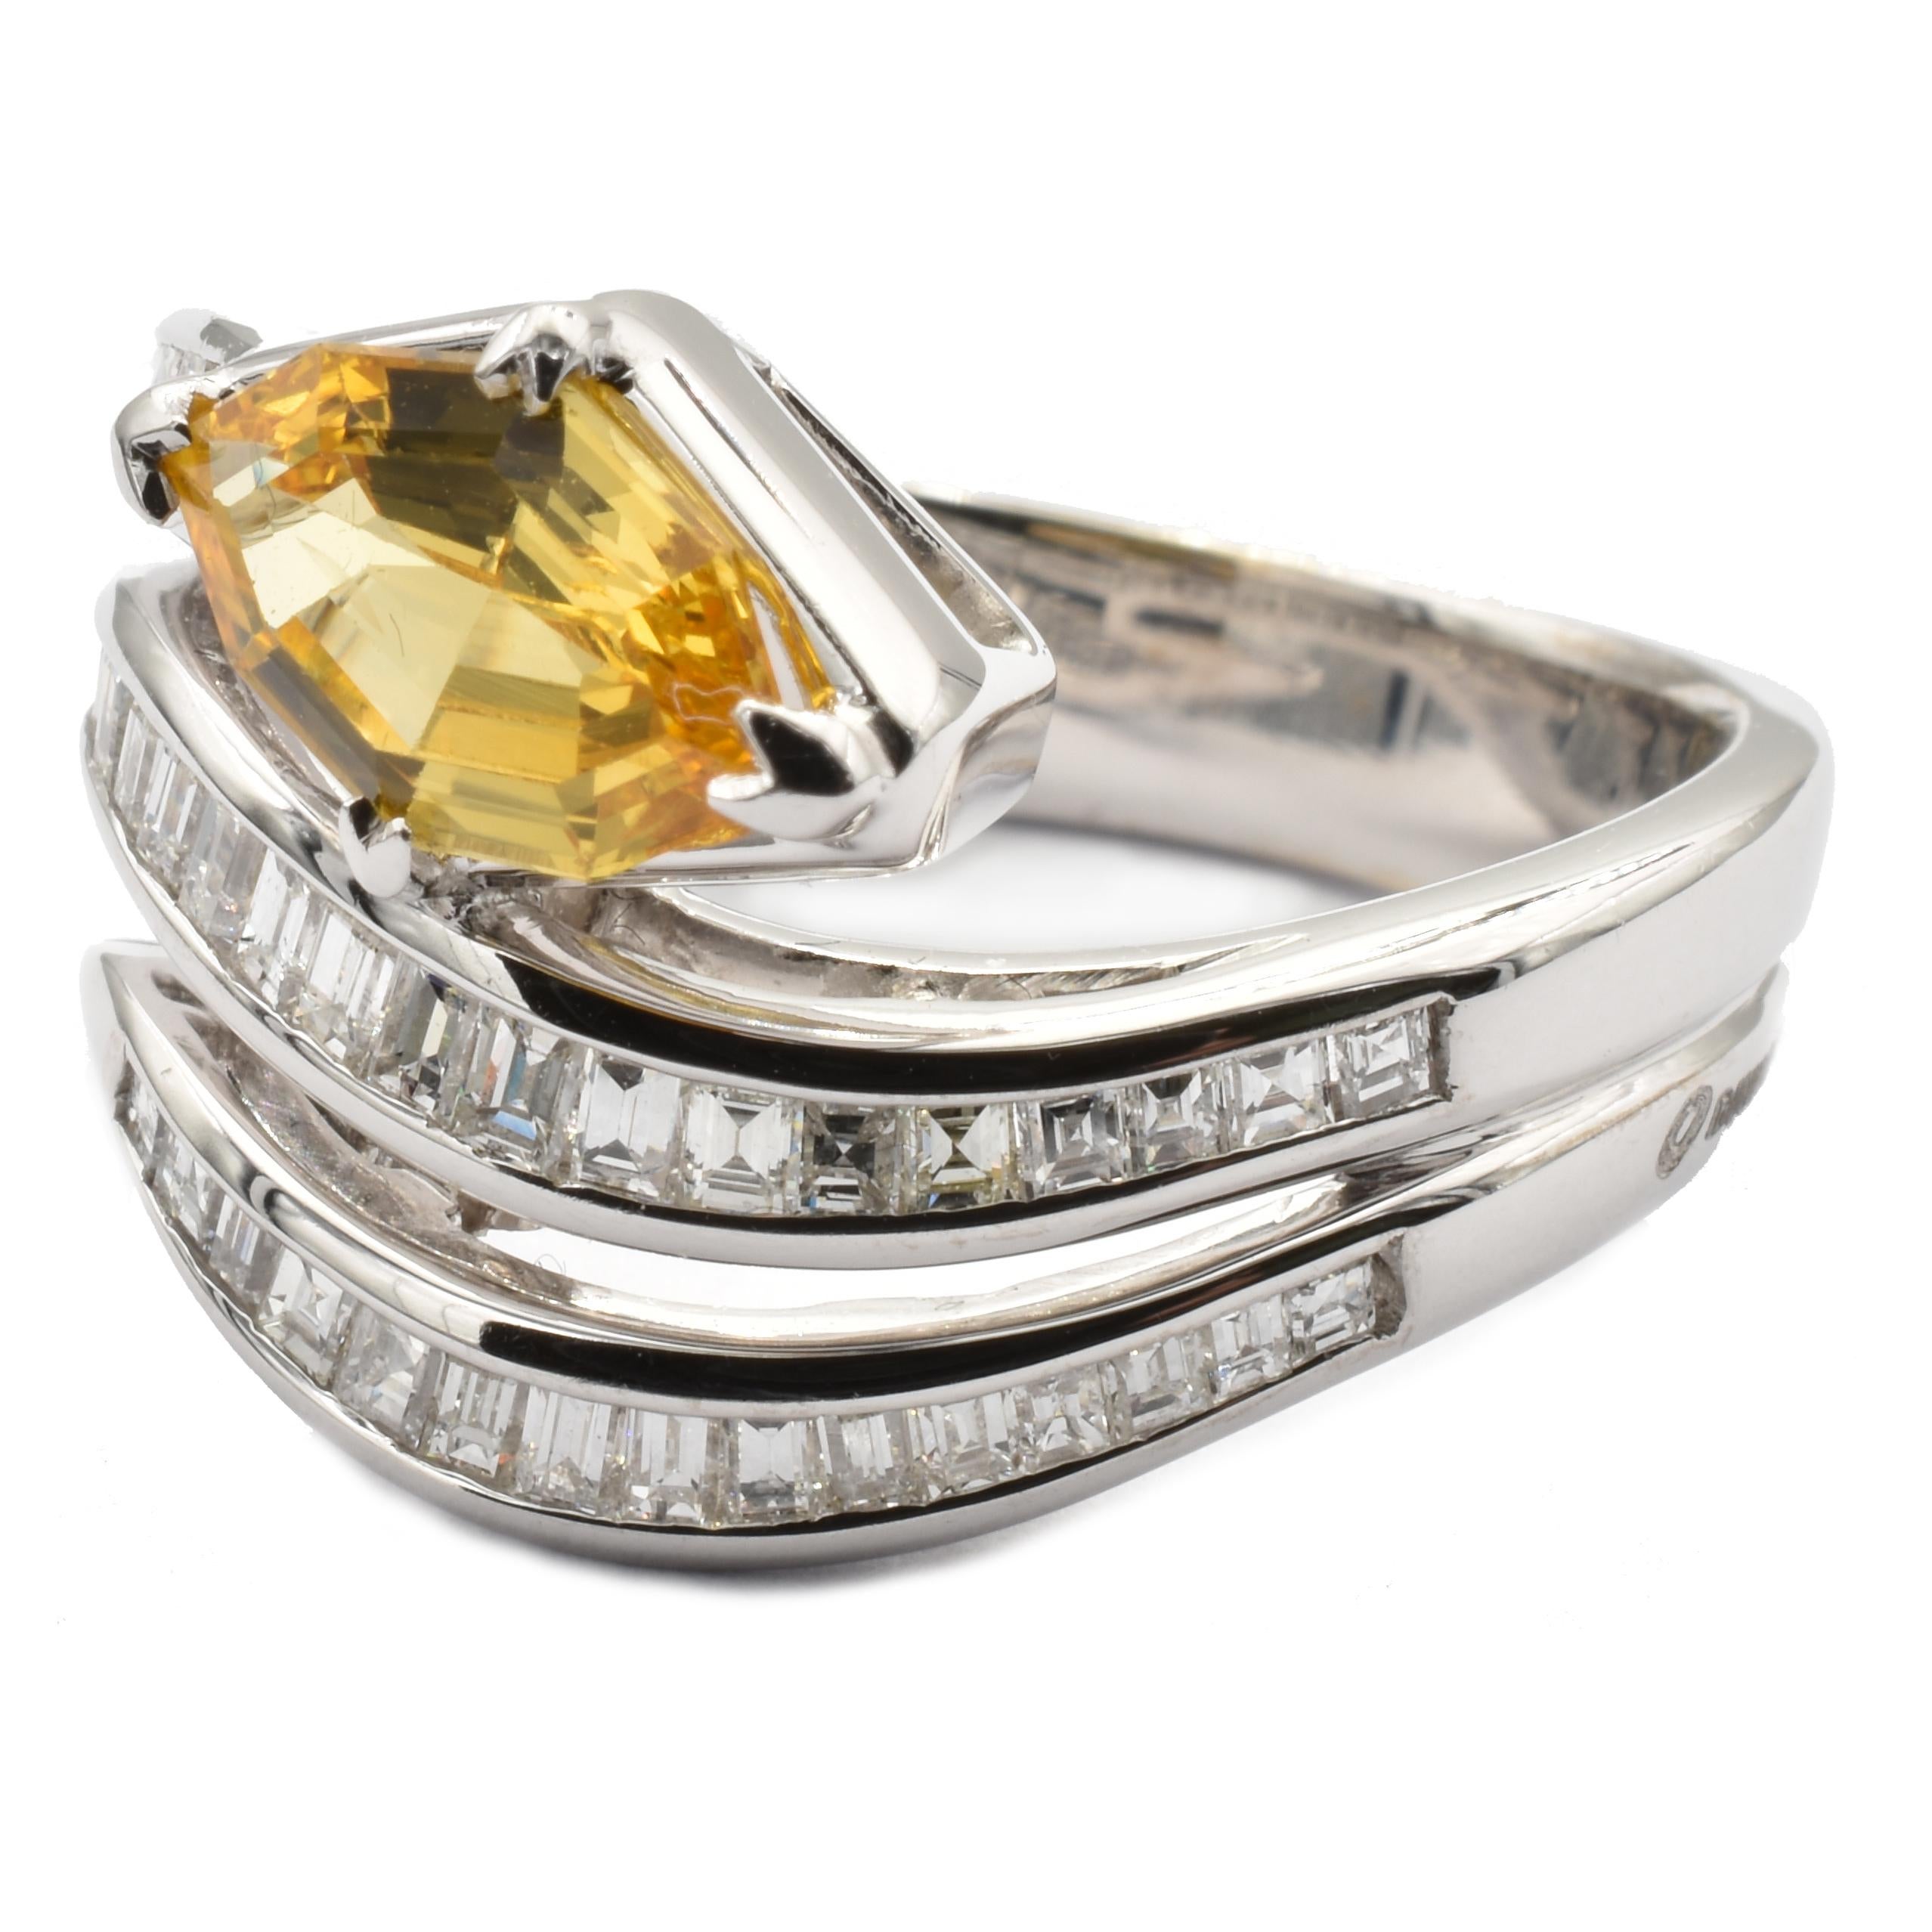 Gilberto Cassola 18Kt White Gold Snake Ring with a Yellow Sapphire Marquise and Carrè Diamonds.
Handmade in our Atelier in Valenza Italy.
Bright Yellow Sapphire Marquise sized mm 9.00 X 5.90.  Weight ct 1.95
G Color Vs Clarity Carrè Diamonds ct